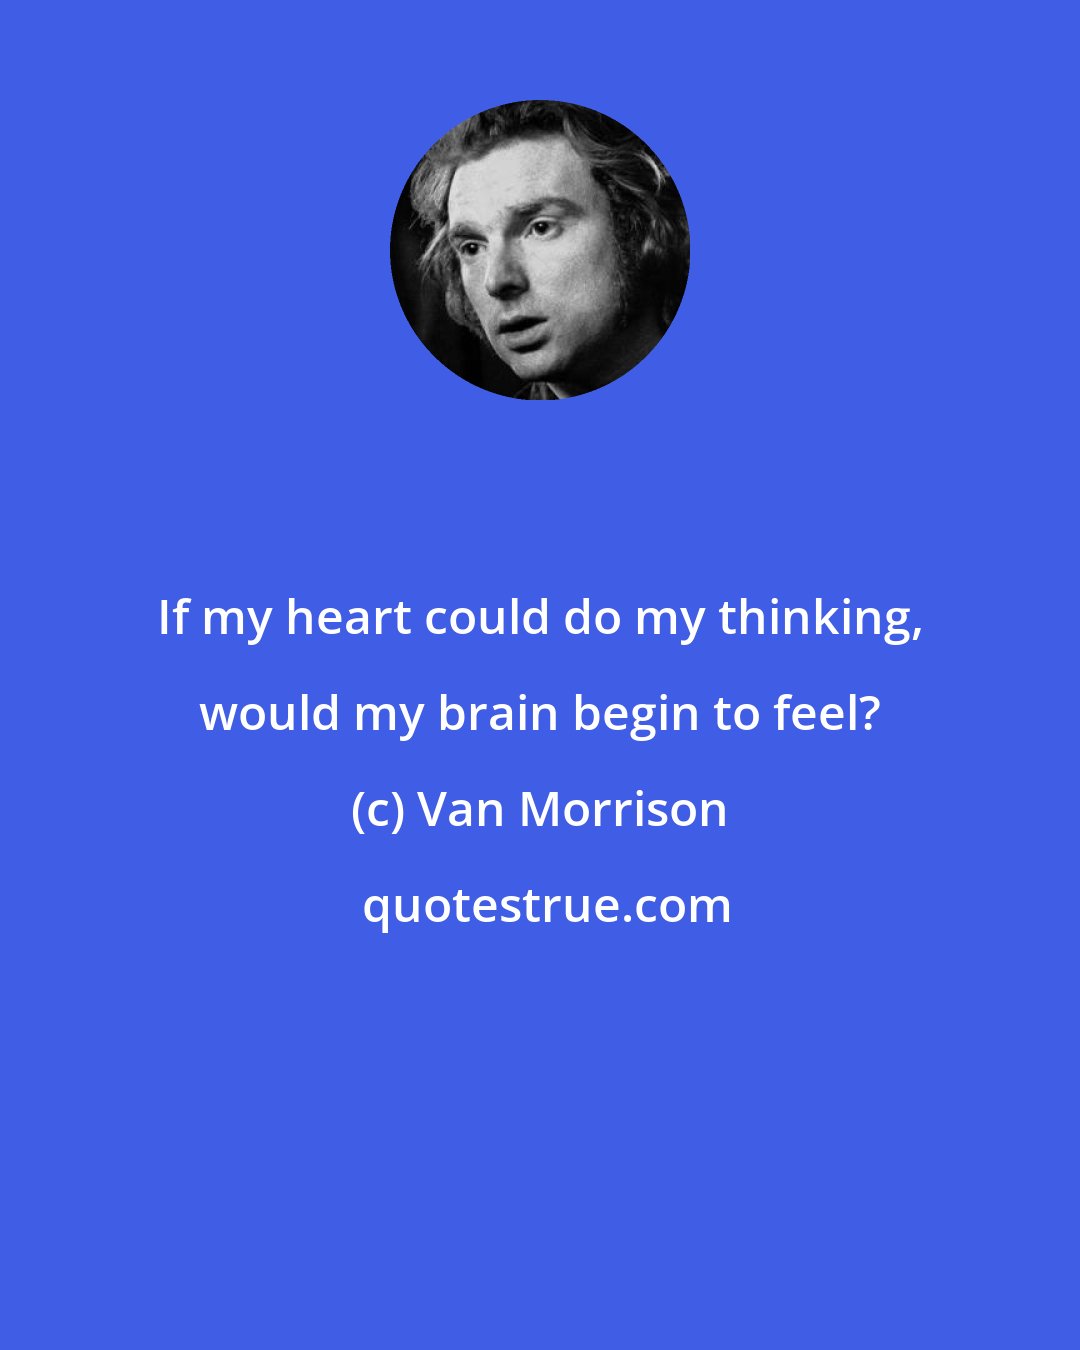 Van Morrison: If my heart could do my thinking, would my brain begin to feel?